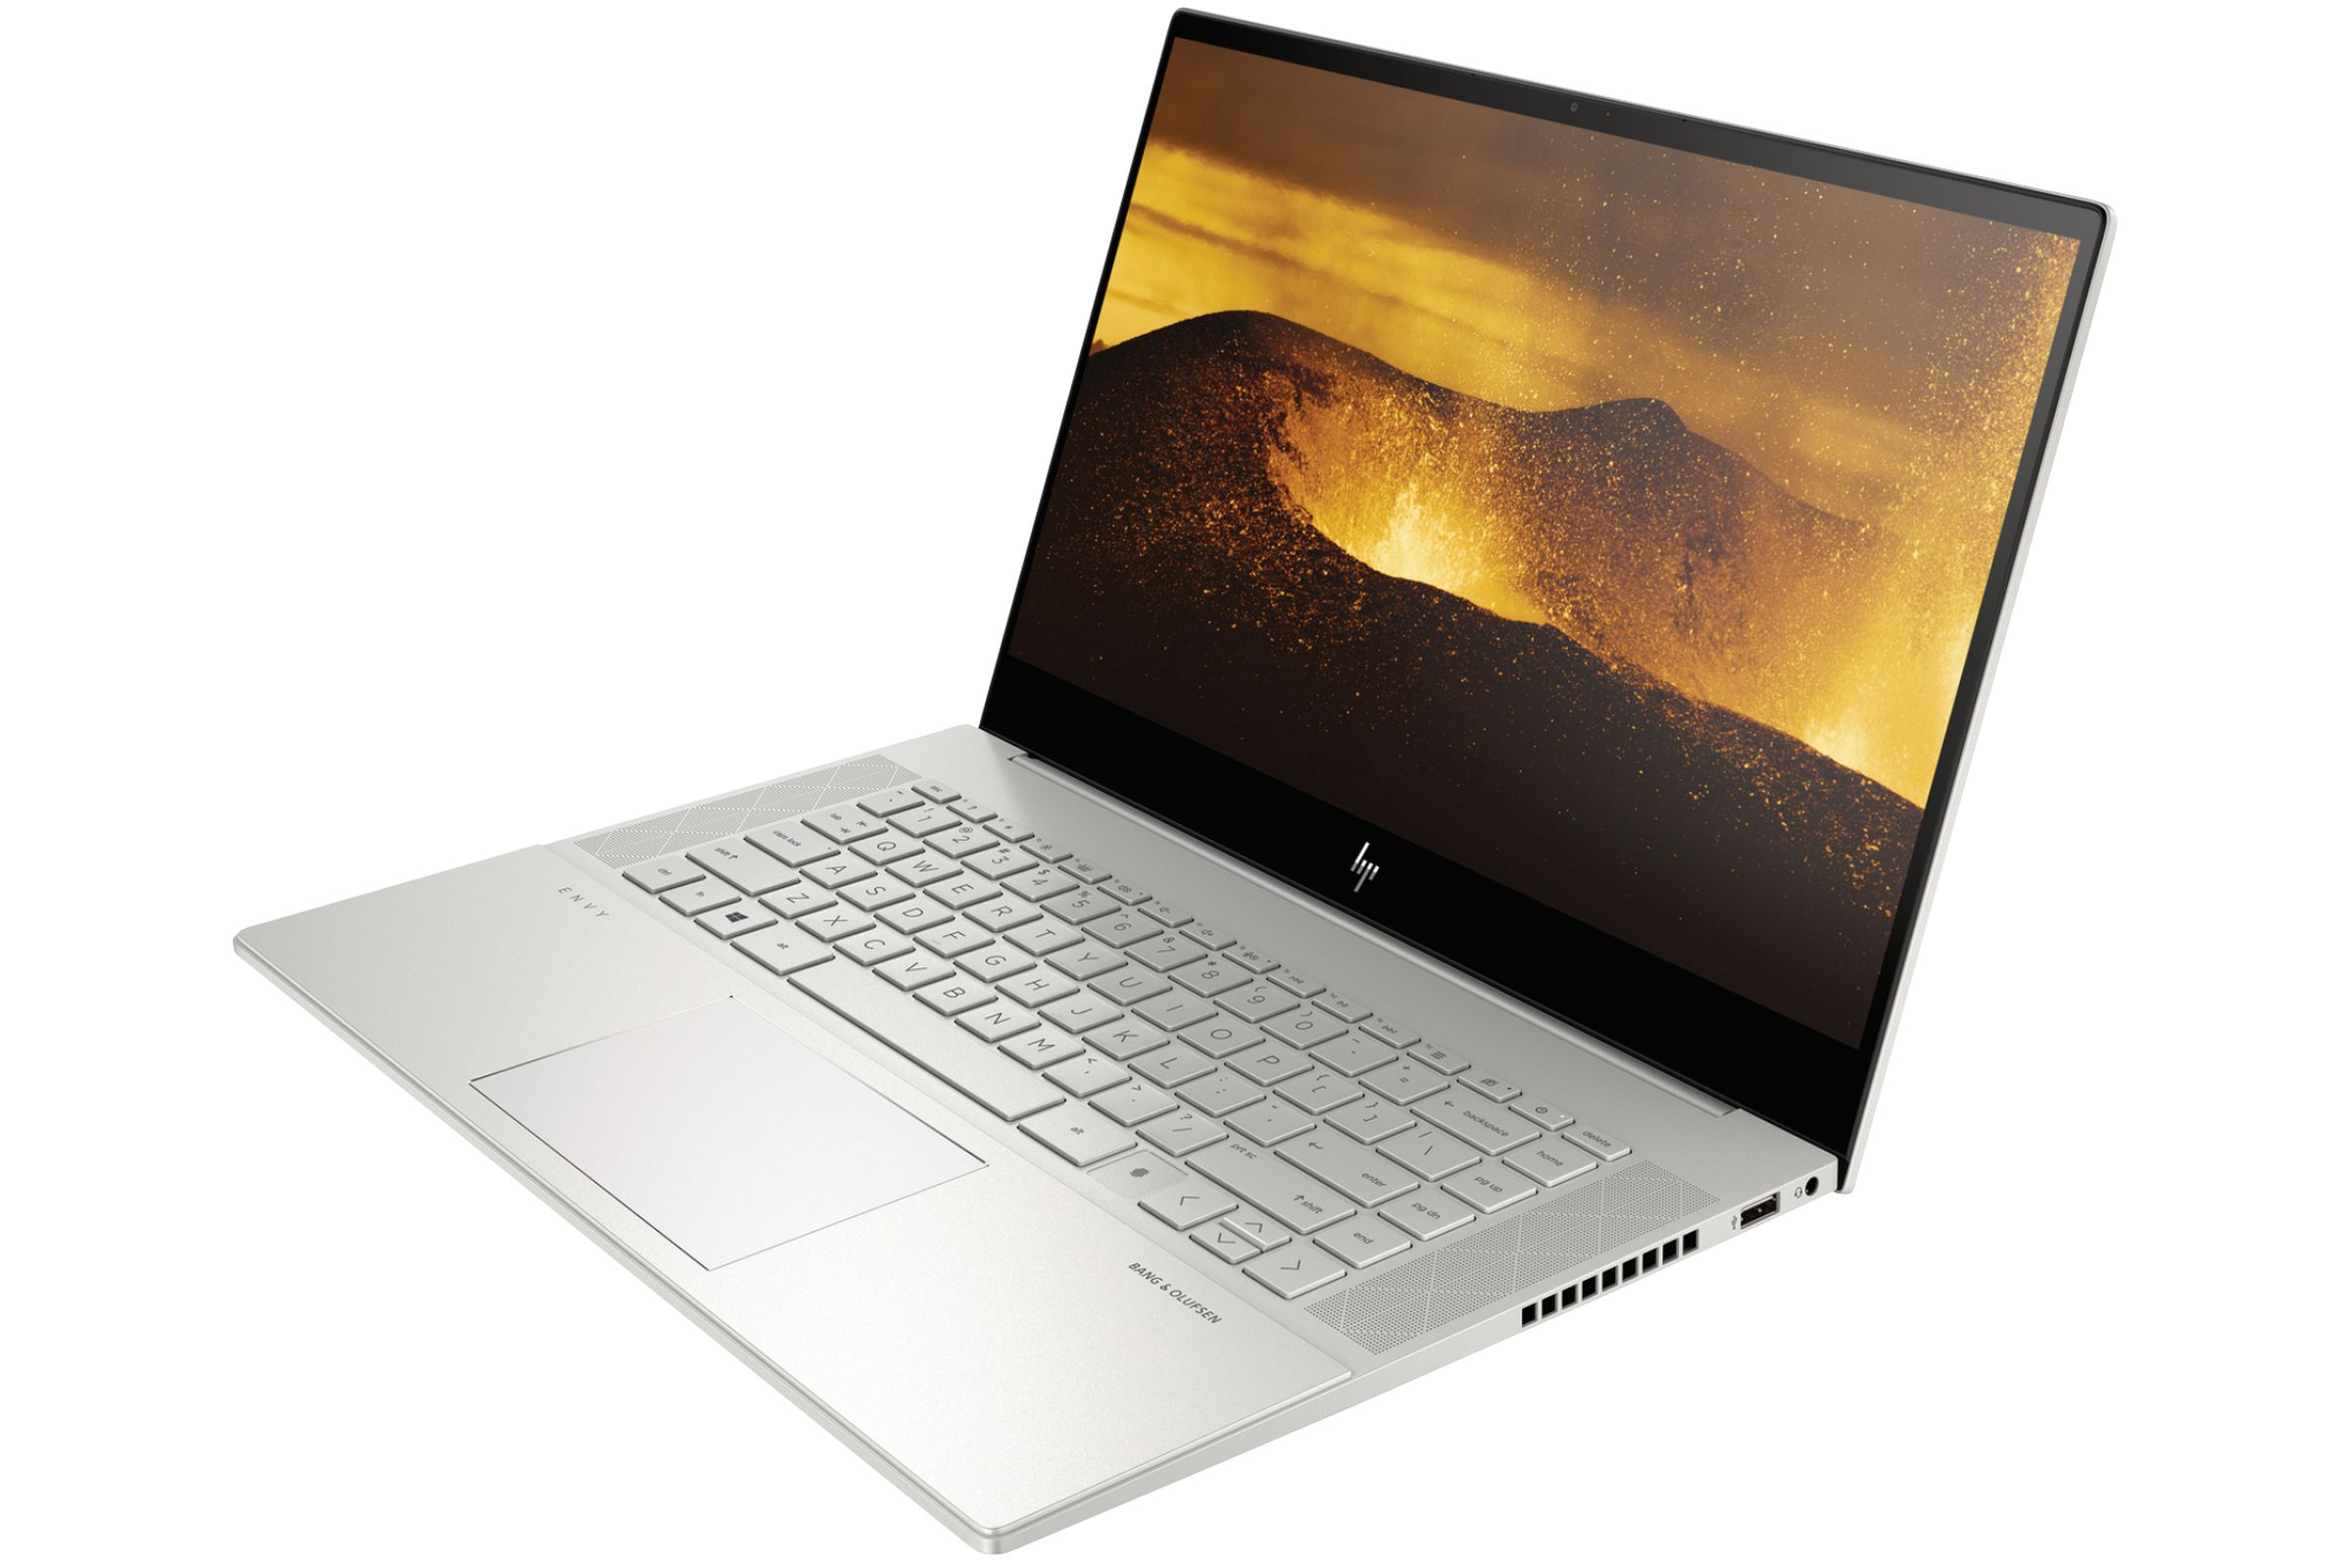 The redesigned HP Envy 15.